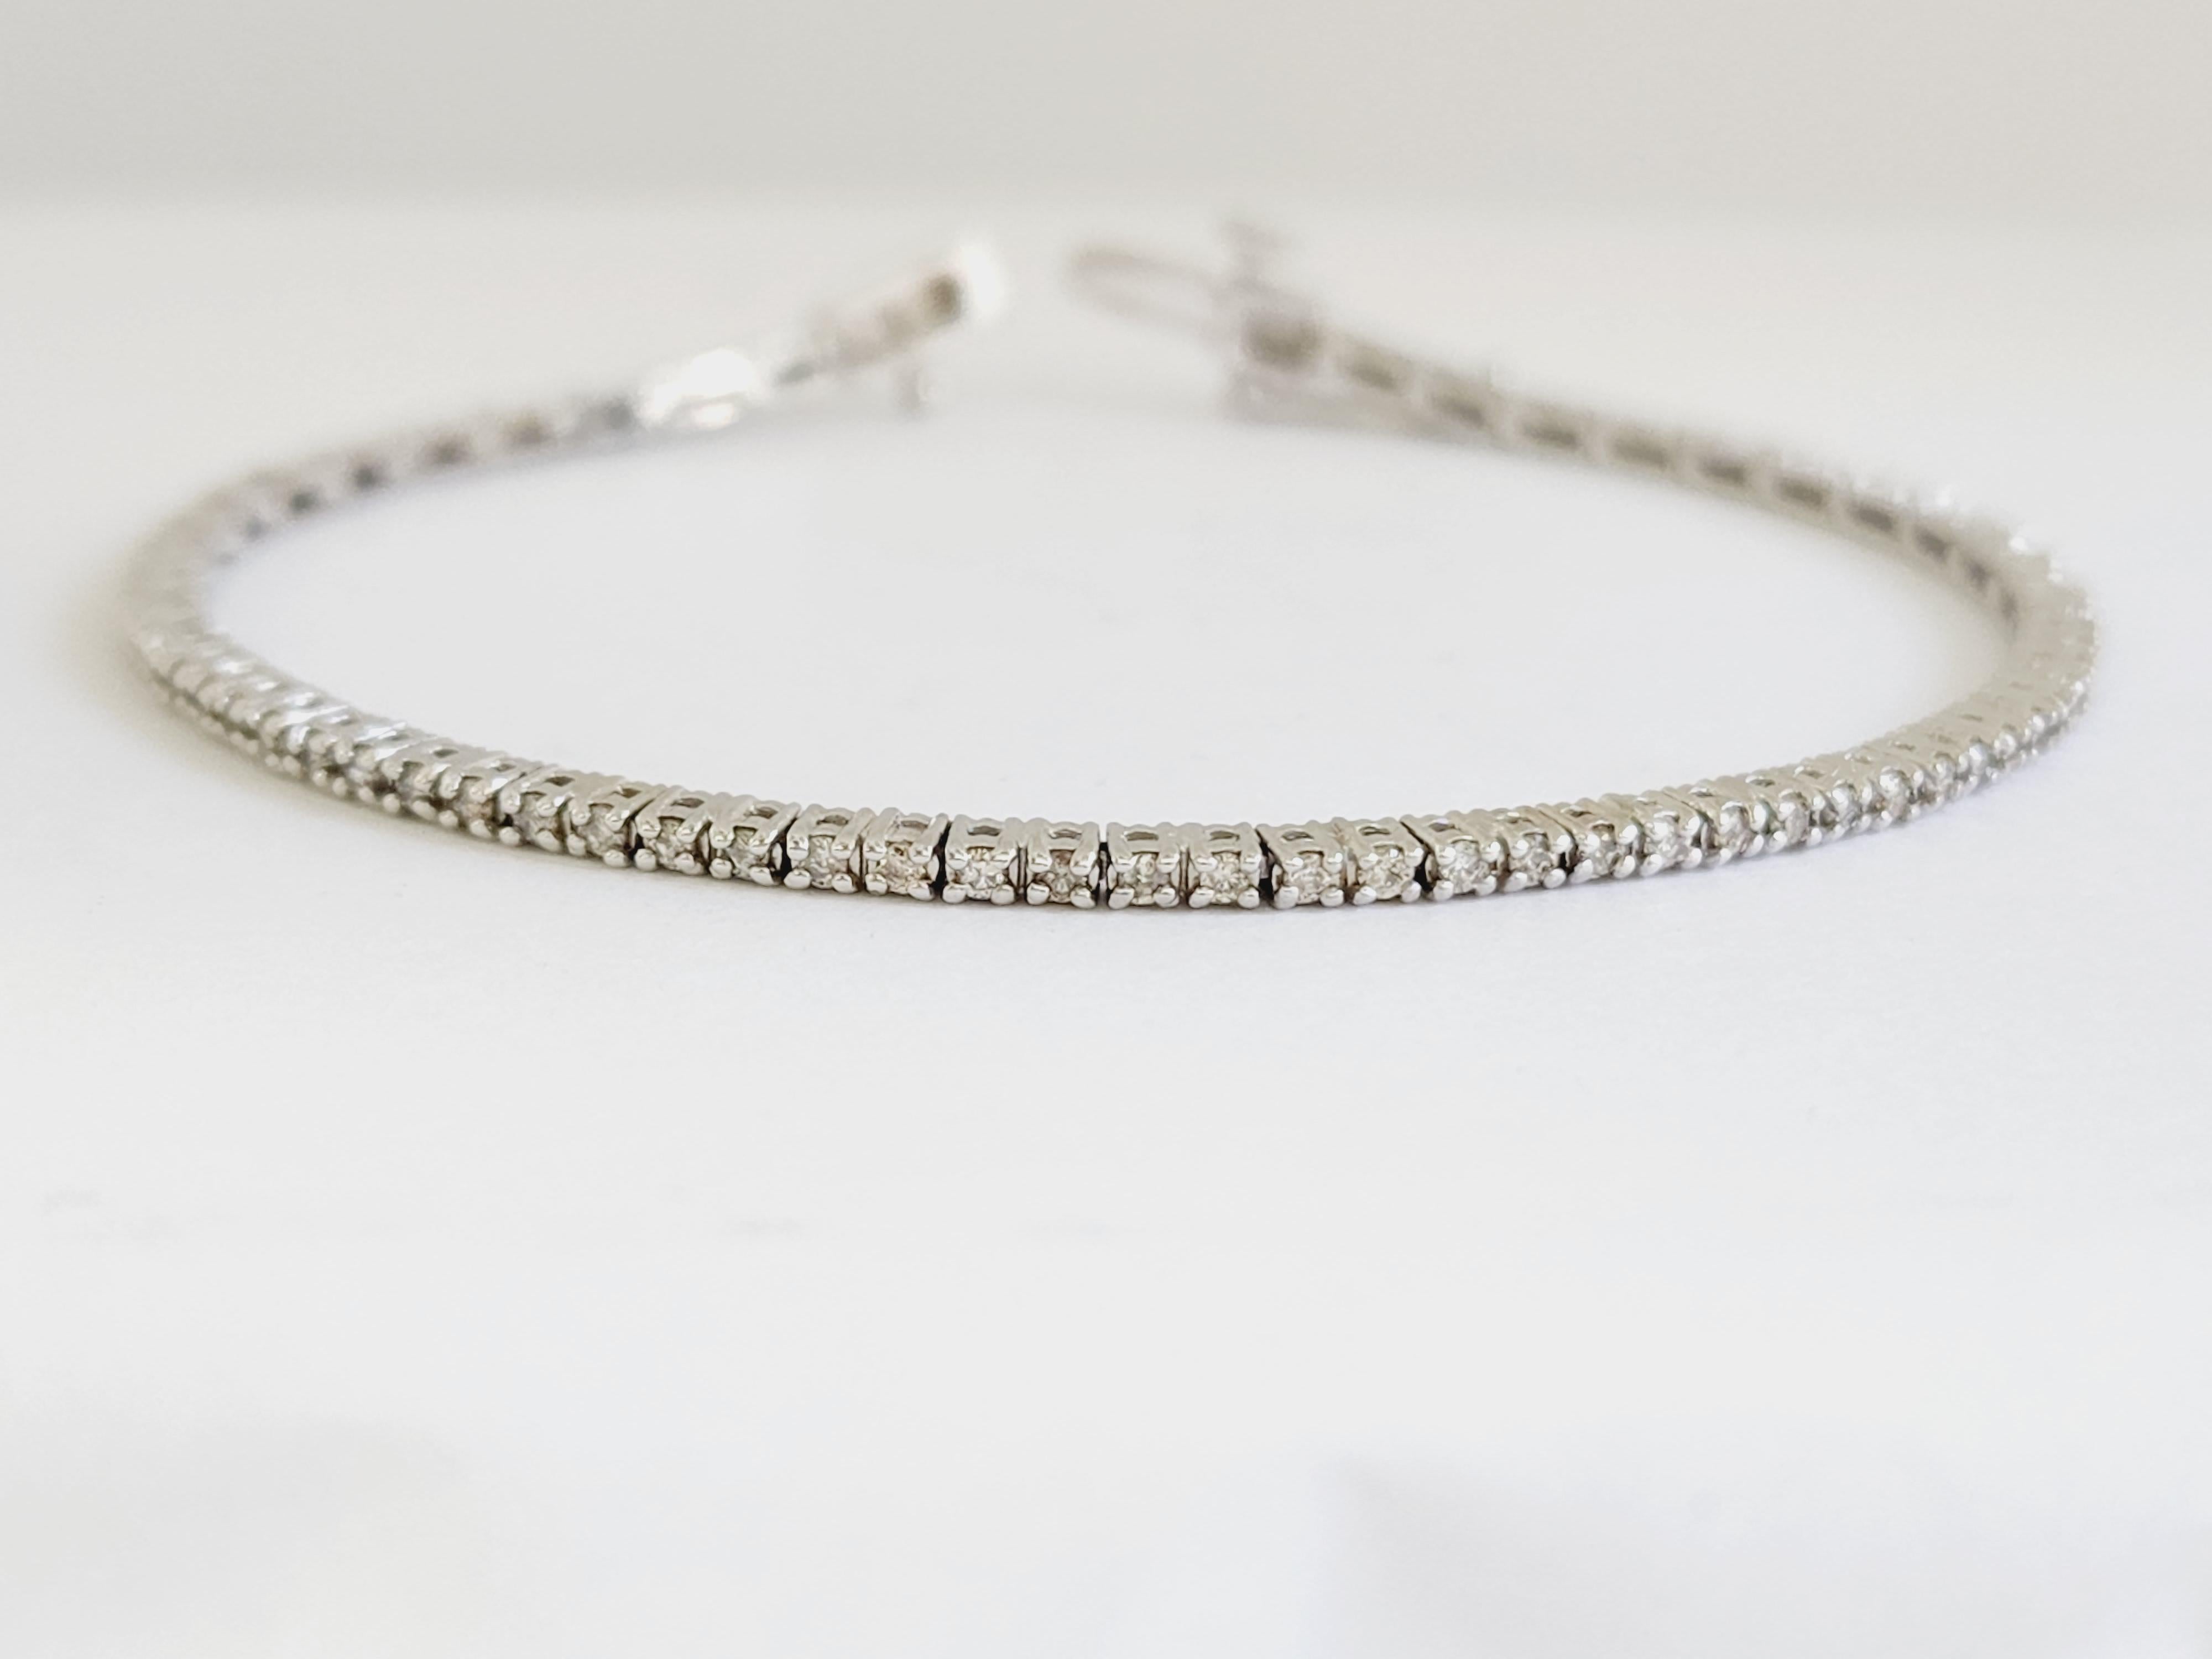 Very sparkling and shiny. a great quality tennis bracelet. 14k white gold. each stone is set in a classic four-prong style for maximum light brilliance. 
7 inch length. Average Color H, Clarity SI, Beautiful for everyday wear.

*Free shipping within